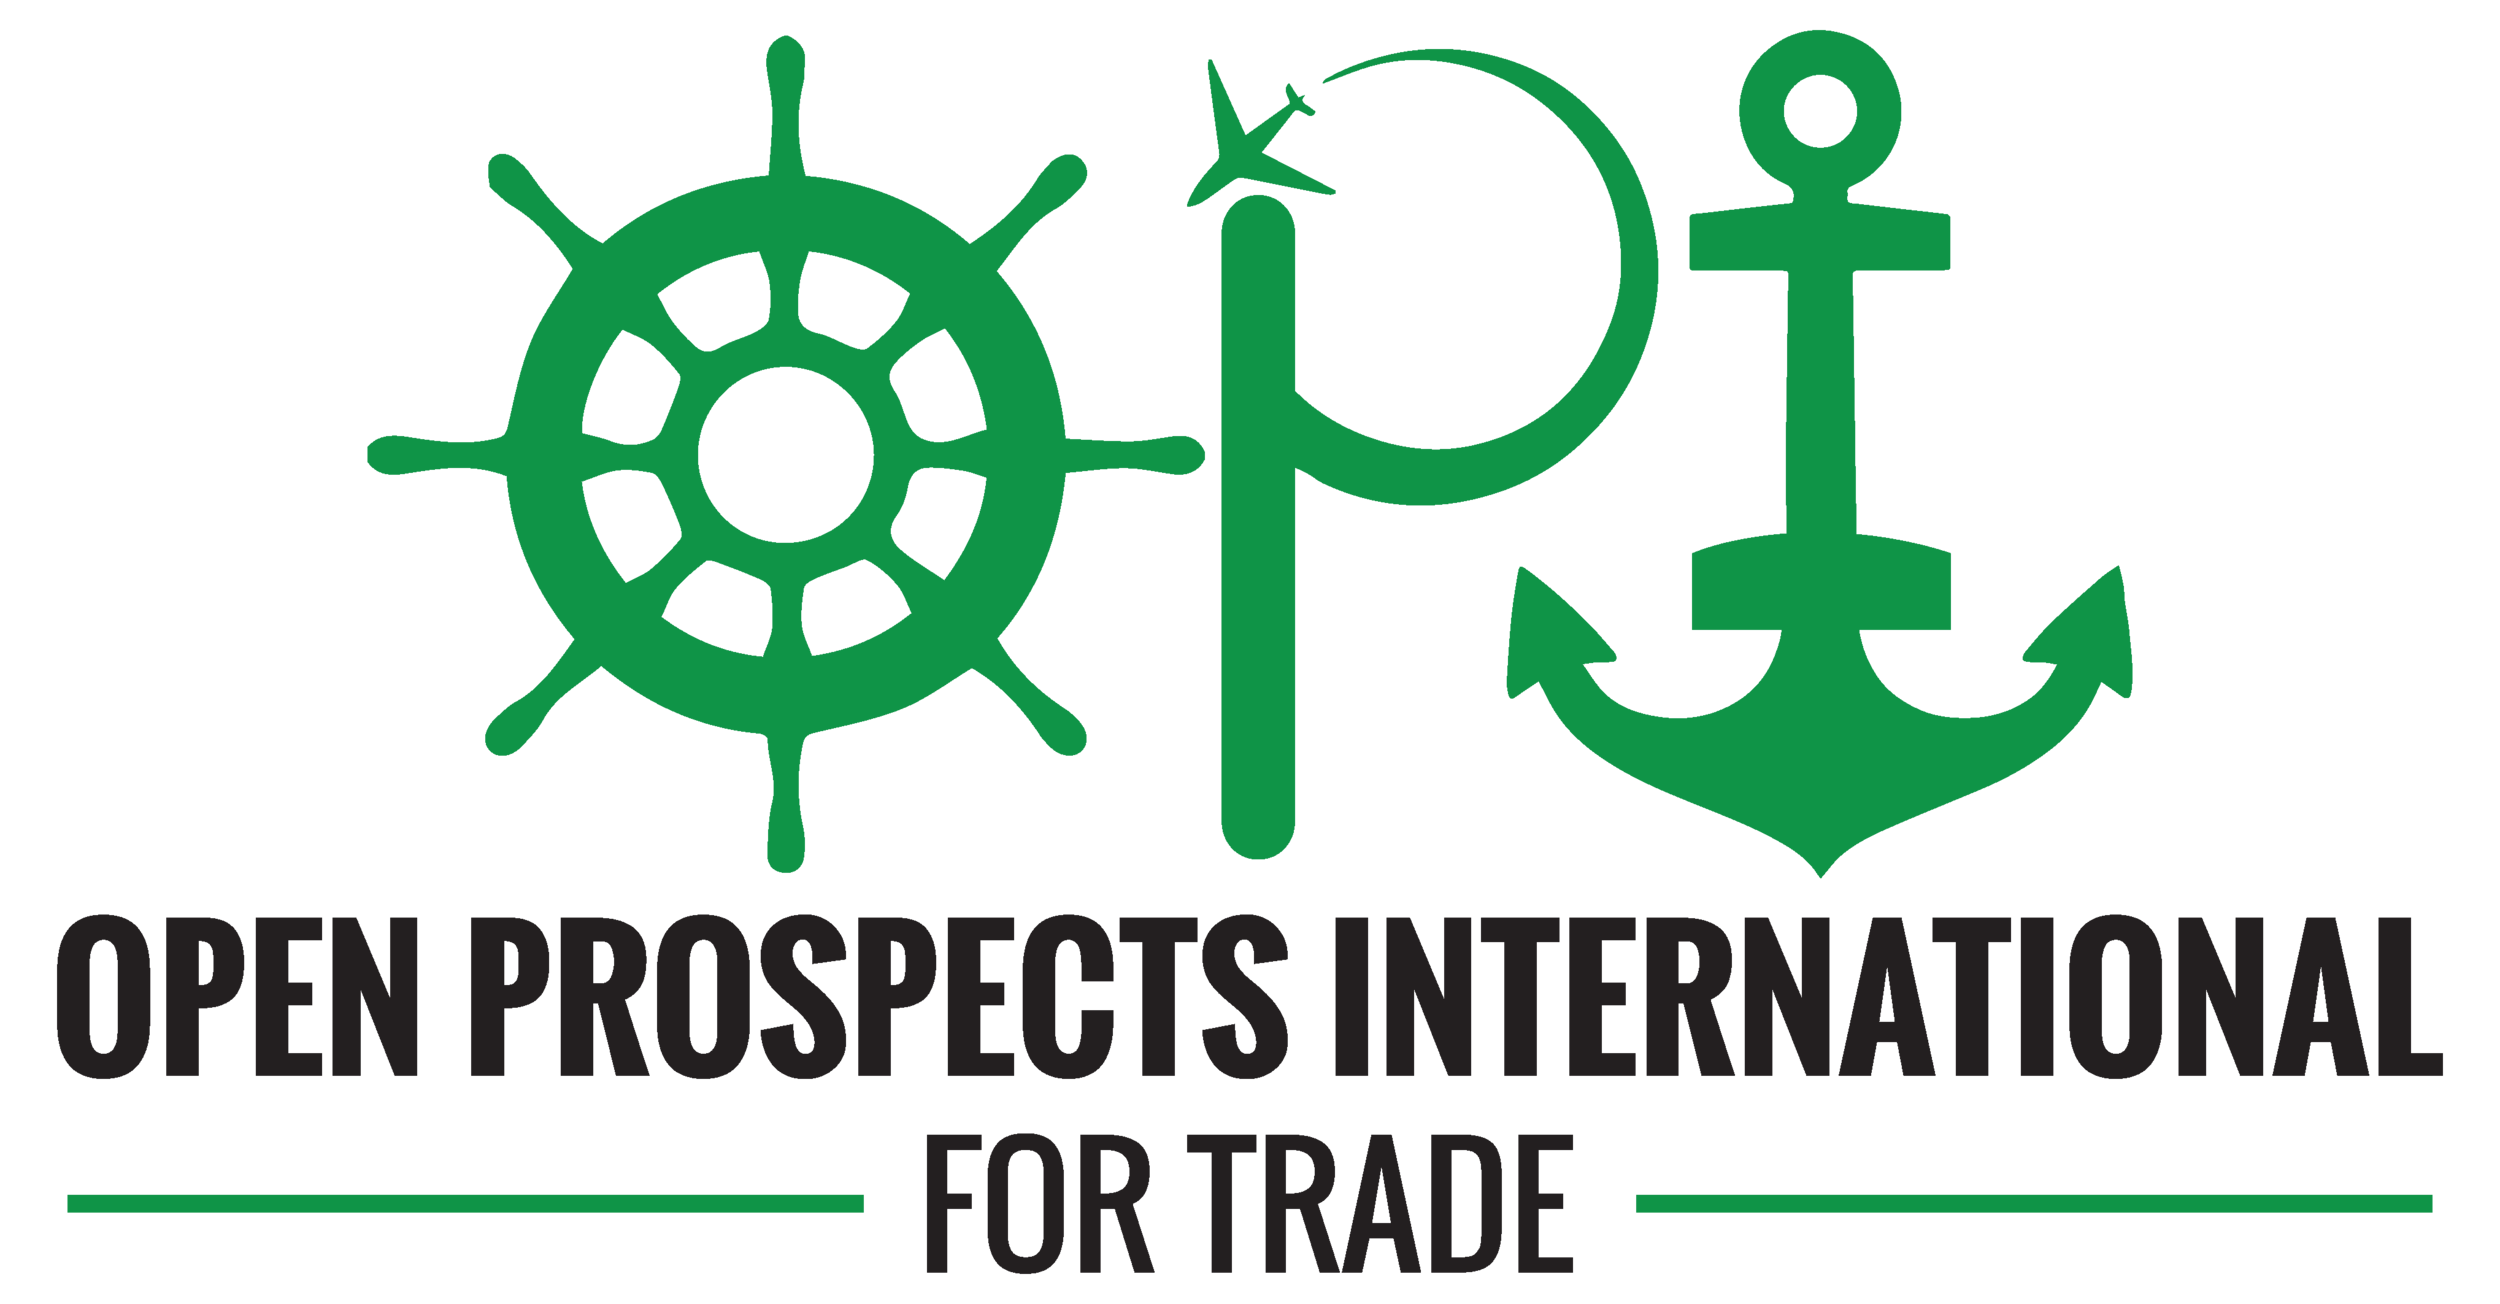 Open Prospects International for Trade